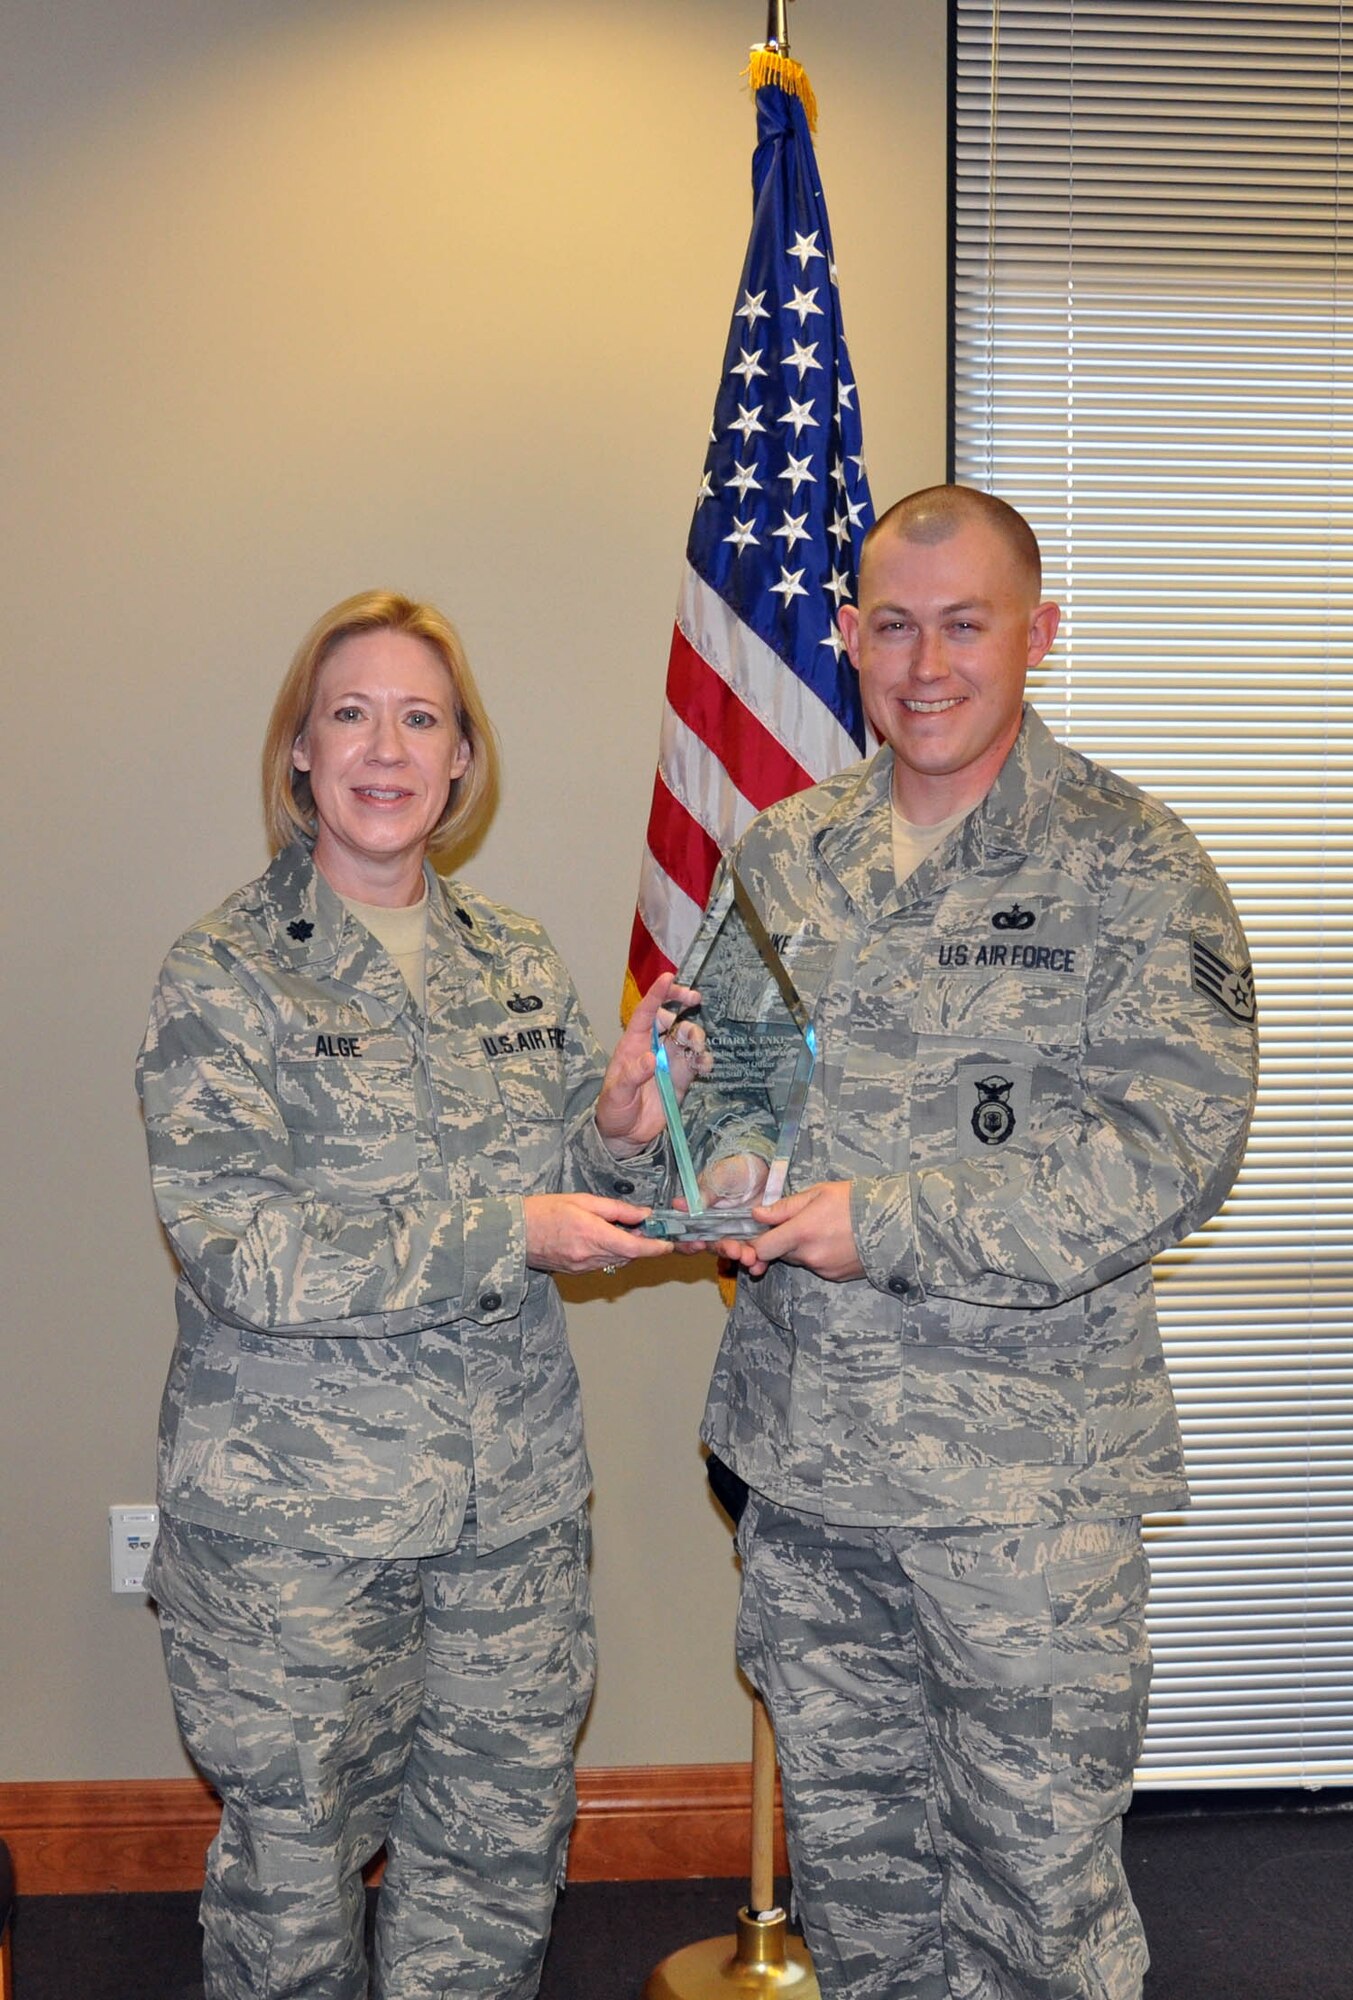 (Right) Staff Sgt. Zachary Enke, 926th Security Forces Flight assistant squad leader, receives Air Force Reserve Command's 2012 Outstanding Security Forces Noncommissioned Officer Support Staff award from Lt. Col. Connie Alge, 926th Force Support Squadron commander, here Jan. 31. Enke was recognized for instructing 50 short-notice deployers to meet Overseas Contingency Operations taskings, as well as creating a munitions tracking system for the Regular Air Force that cut man hours by 35 percent. Additionally, Enke coordinated more than 2,500 weapons inspections for 15 squadrons that maintained 100 percent mission readiness, among many other accomplishments. (U.S. Air Force photo/Maj, Jessica Martin)